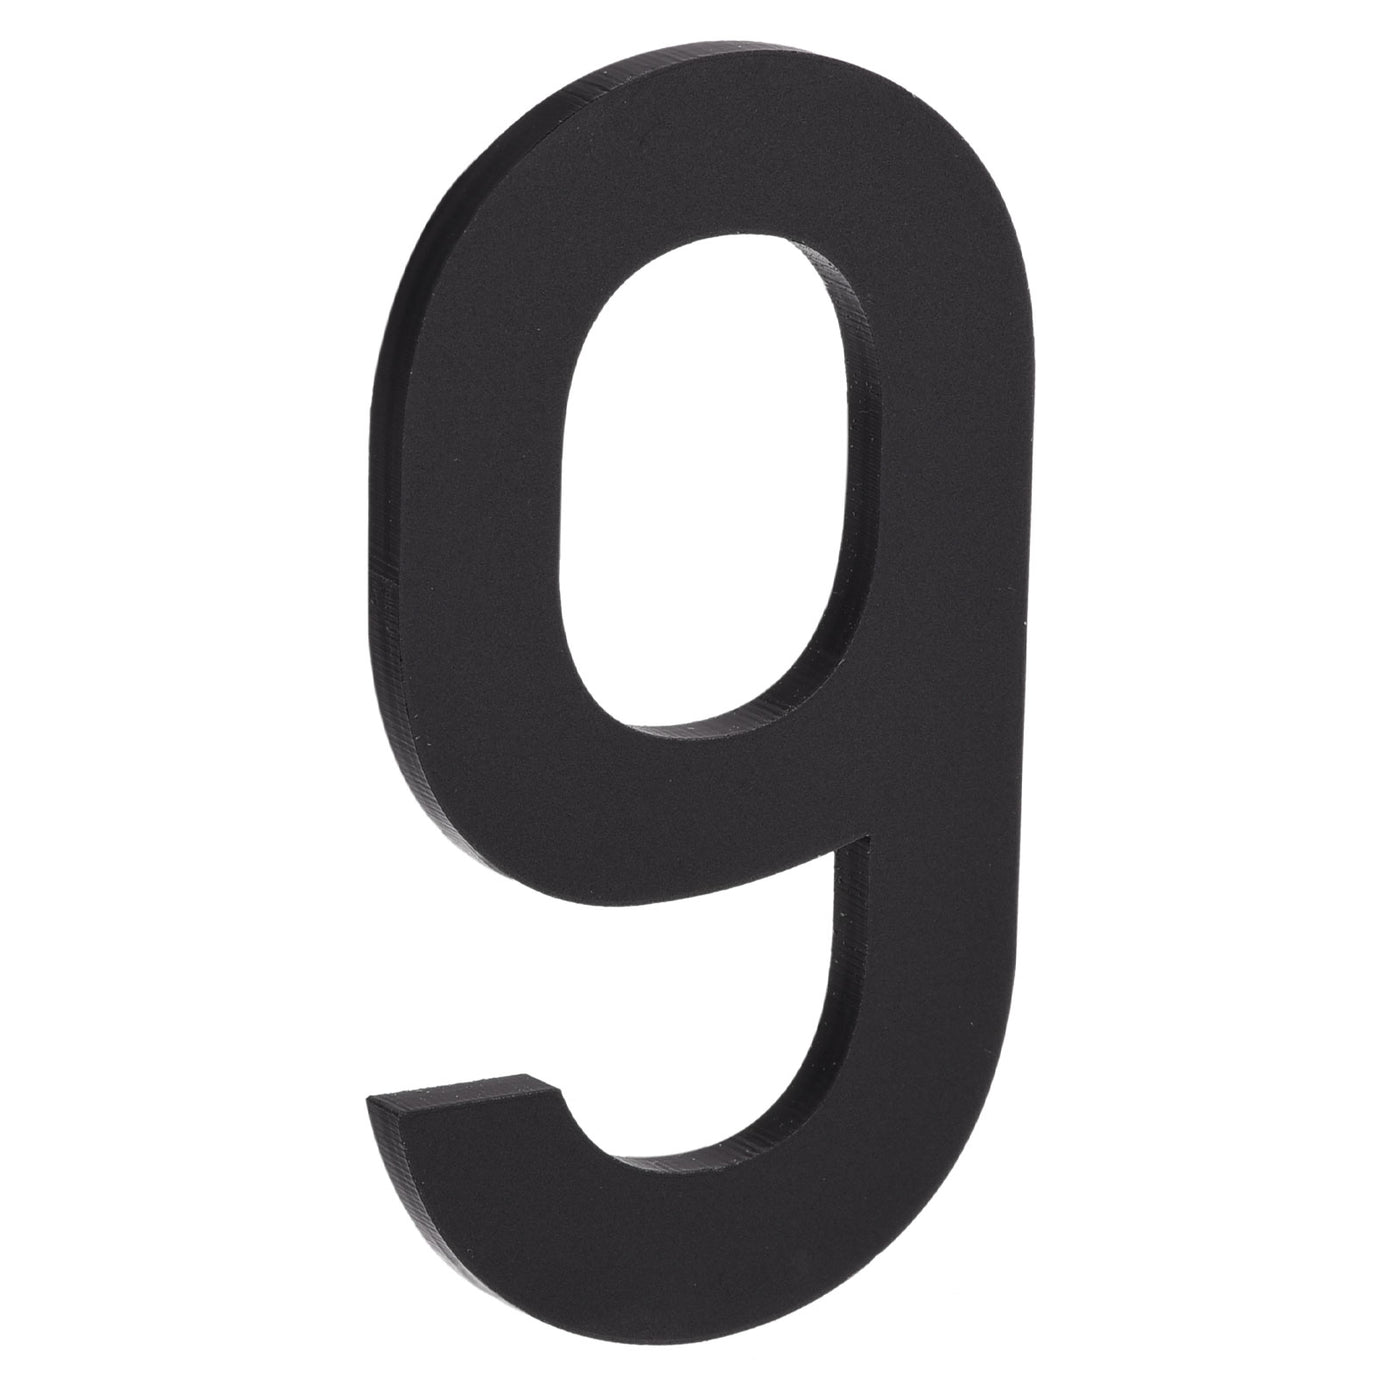 Uxcell Uxcell 3D Self Adhesive House Number 100mm/3.94" Acrylic Address Sign Black, Number 9